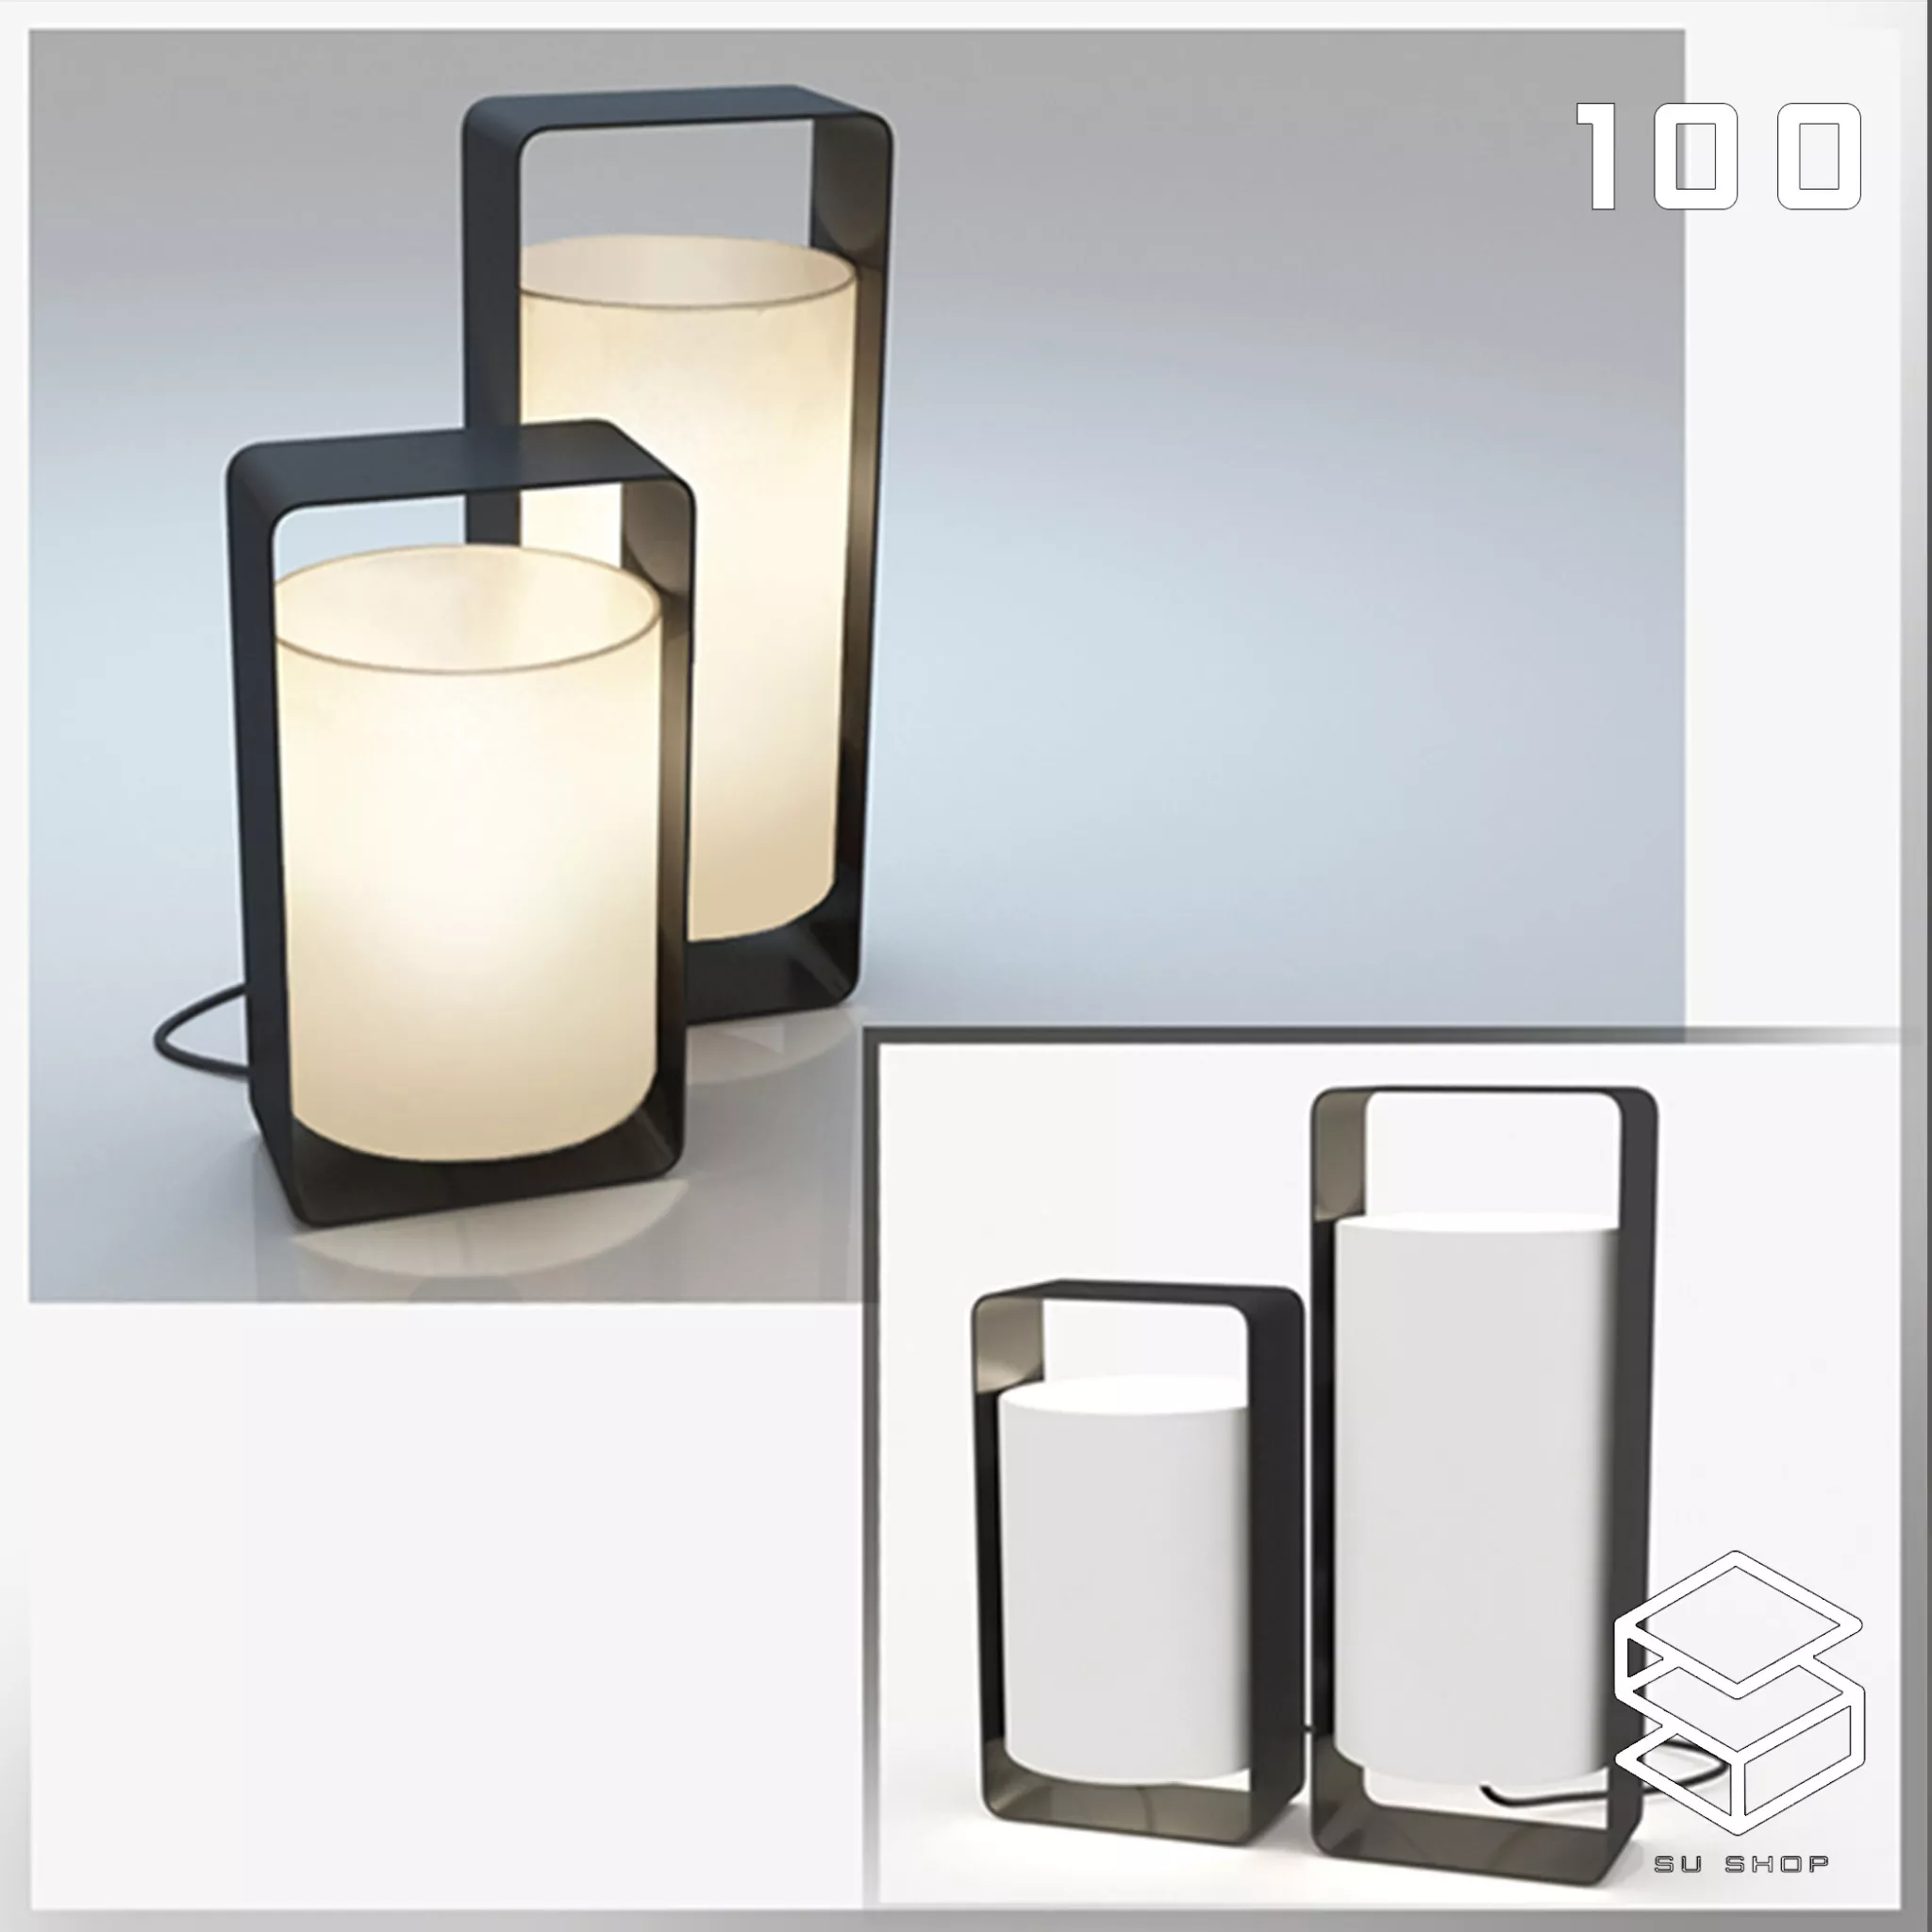 MODERN TABLE LAMP - SKETCHUP 3D MODEL - VRAY OR ENSCAPE - ID14665